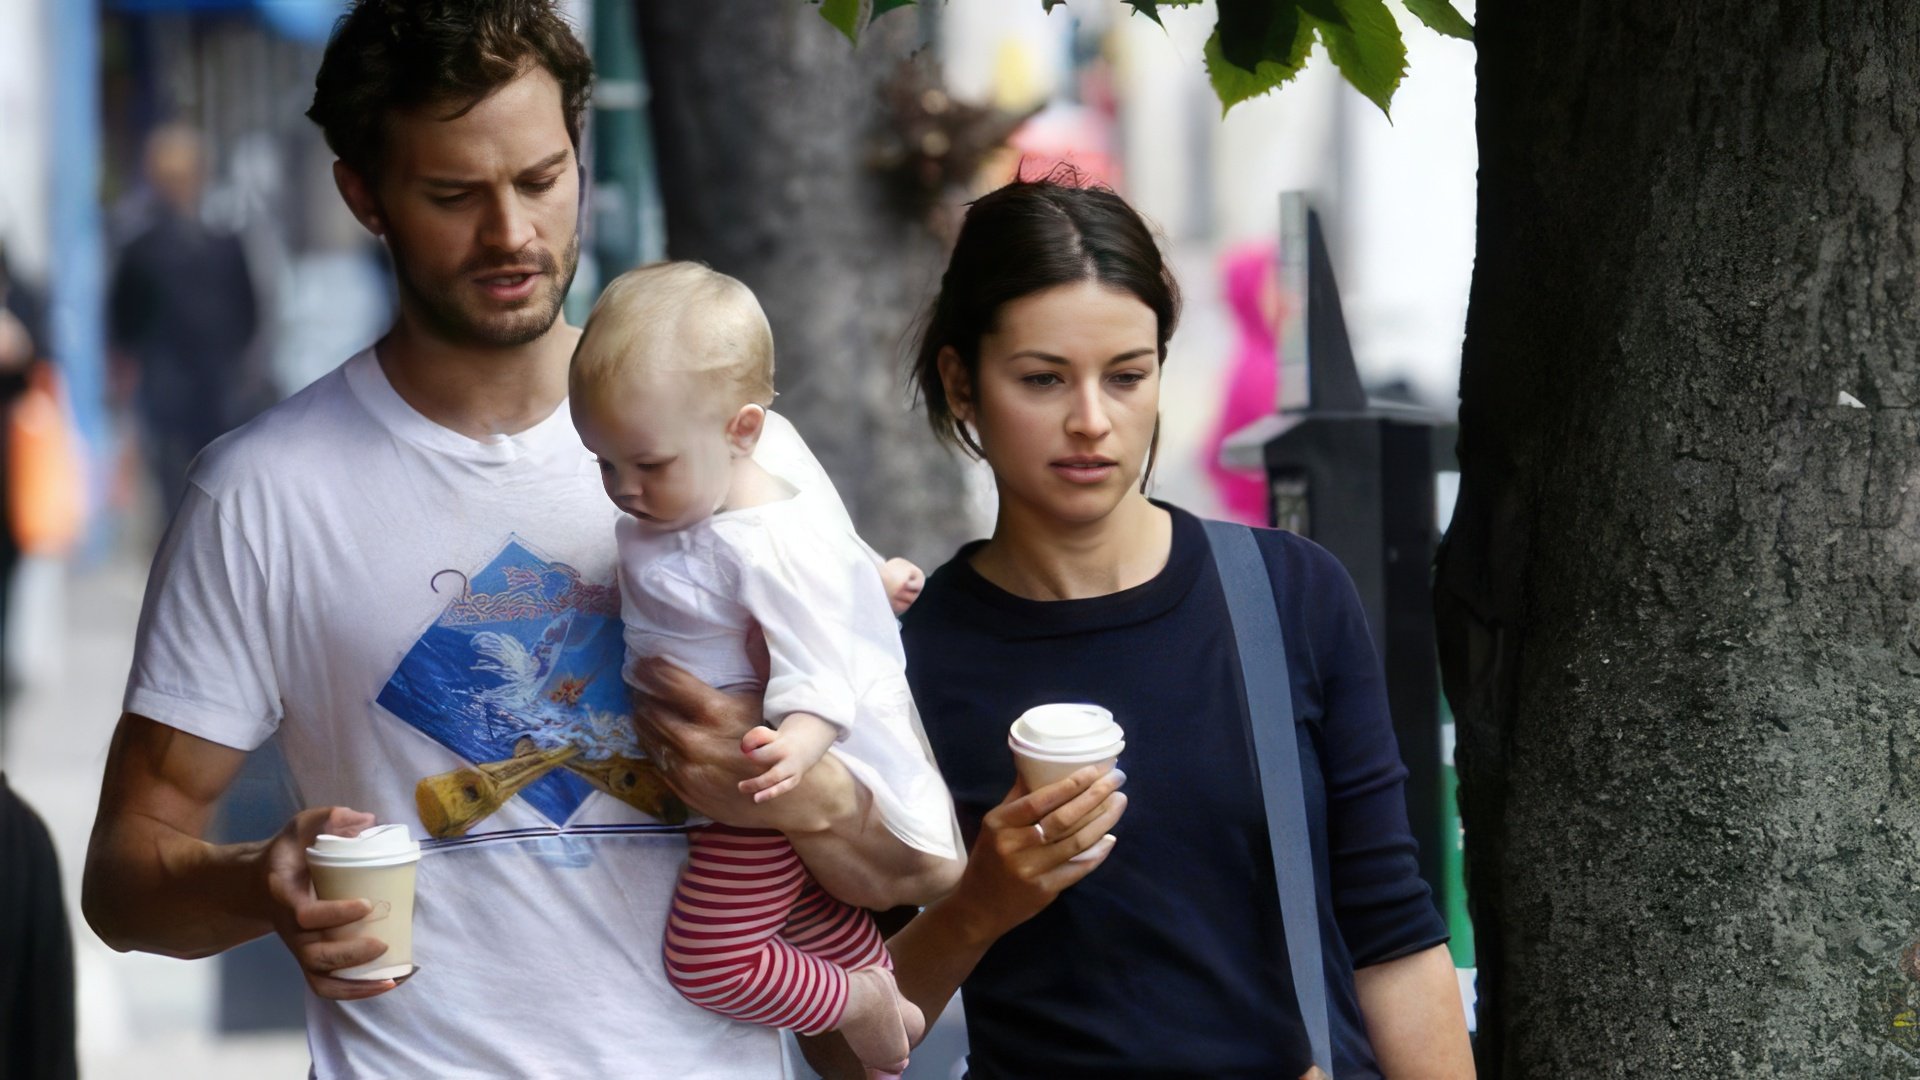 Jamie Dornan with his wife and child